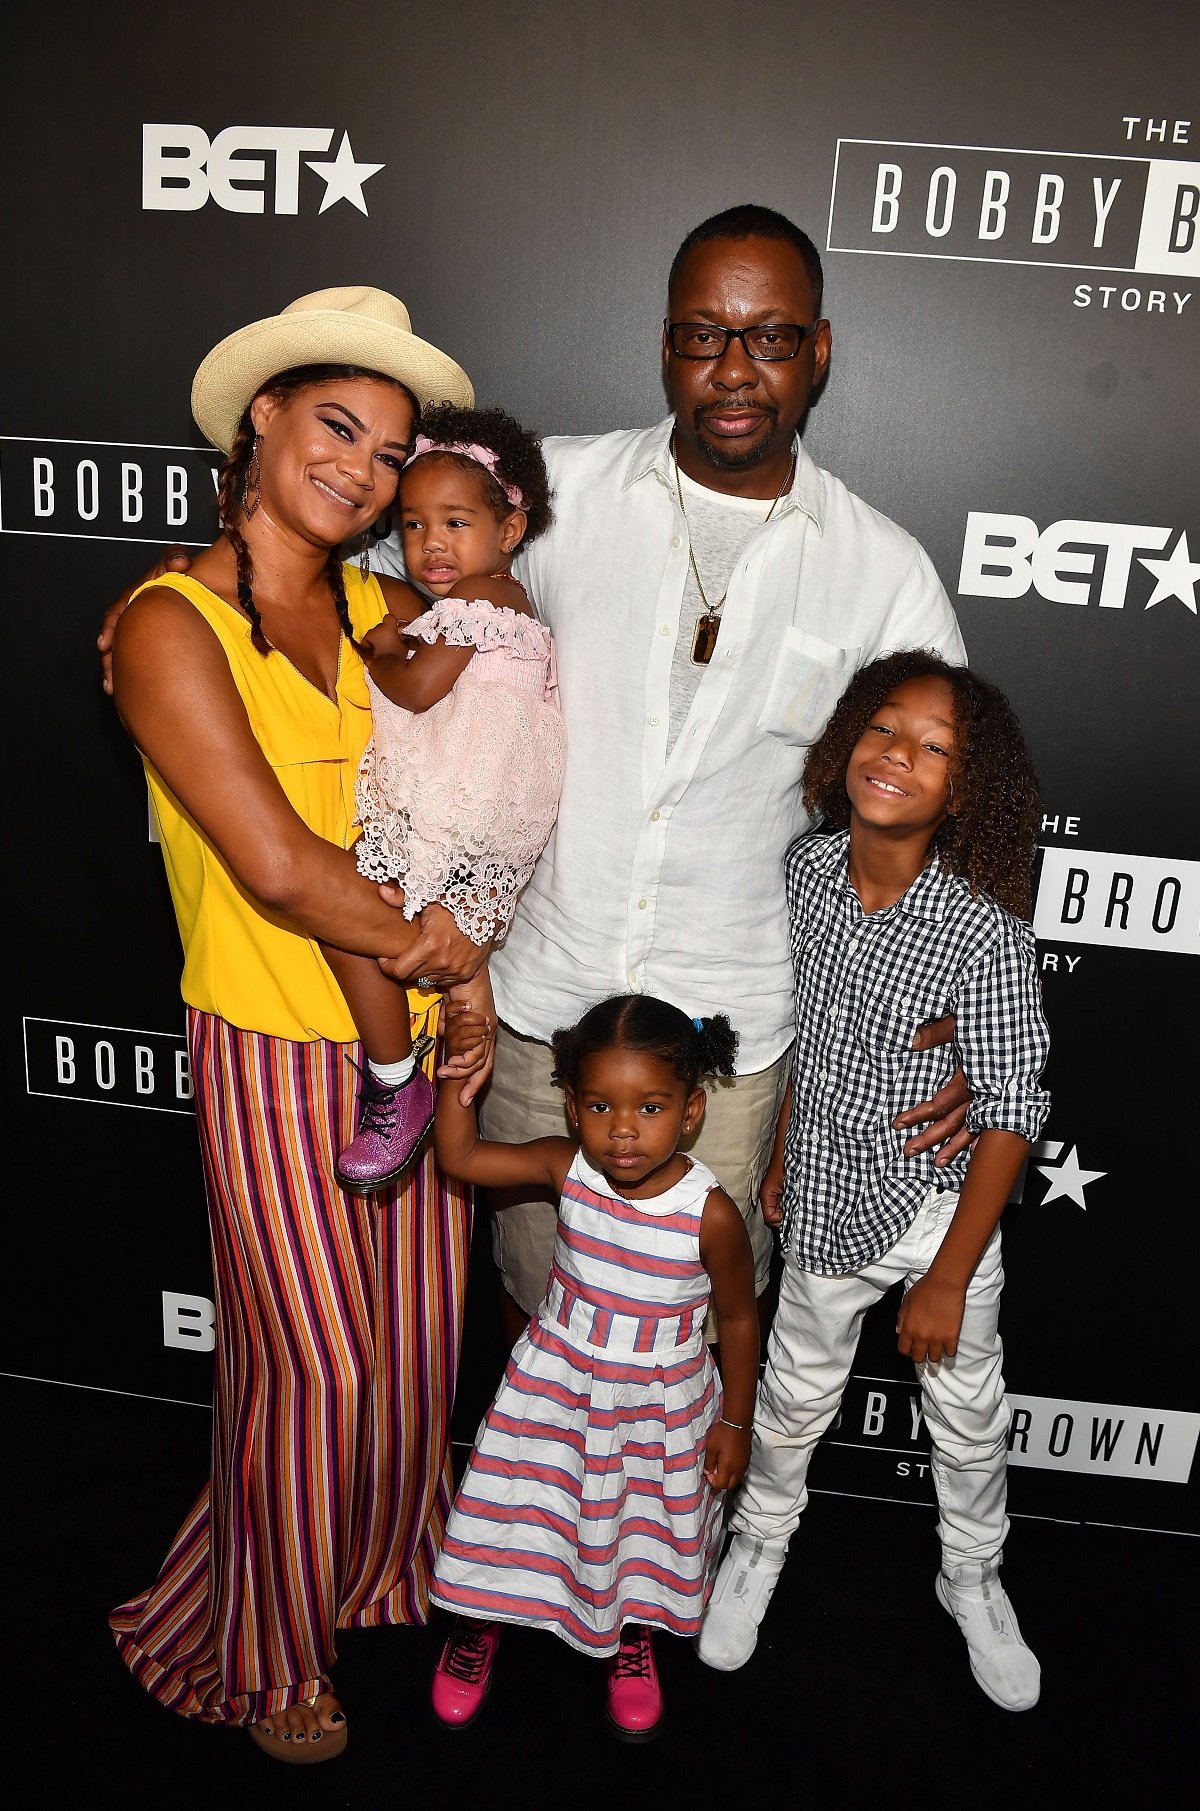 Bobby Brown posing on the red carpet with his wife, Alicia Etheredge-Brown, and their children Bodhi Brown, Hendrix Brown, and Cassius Brown